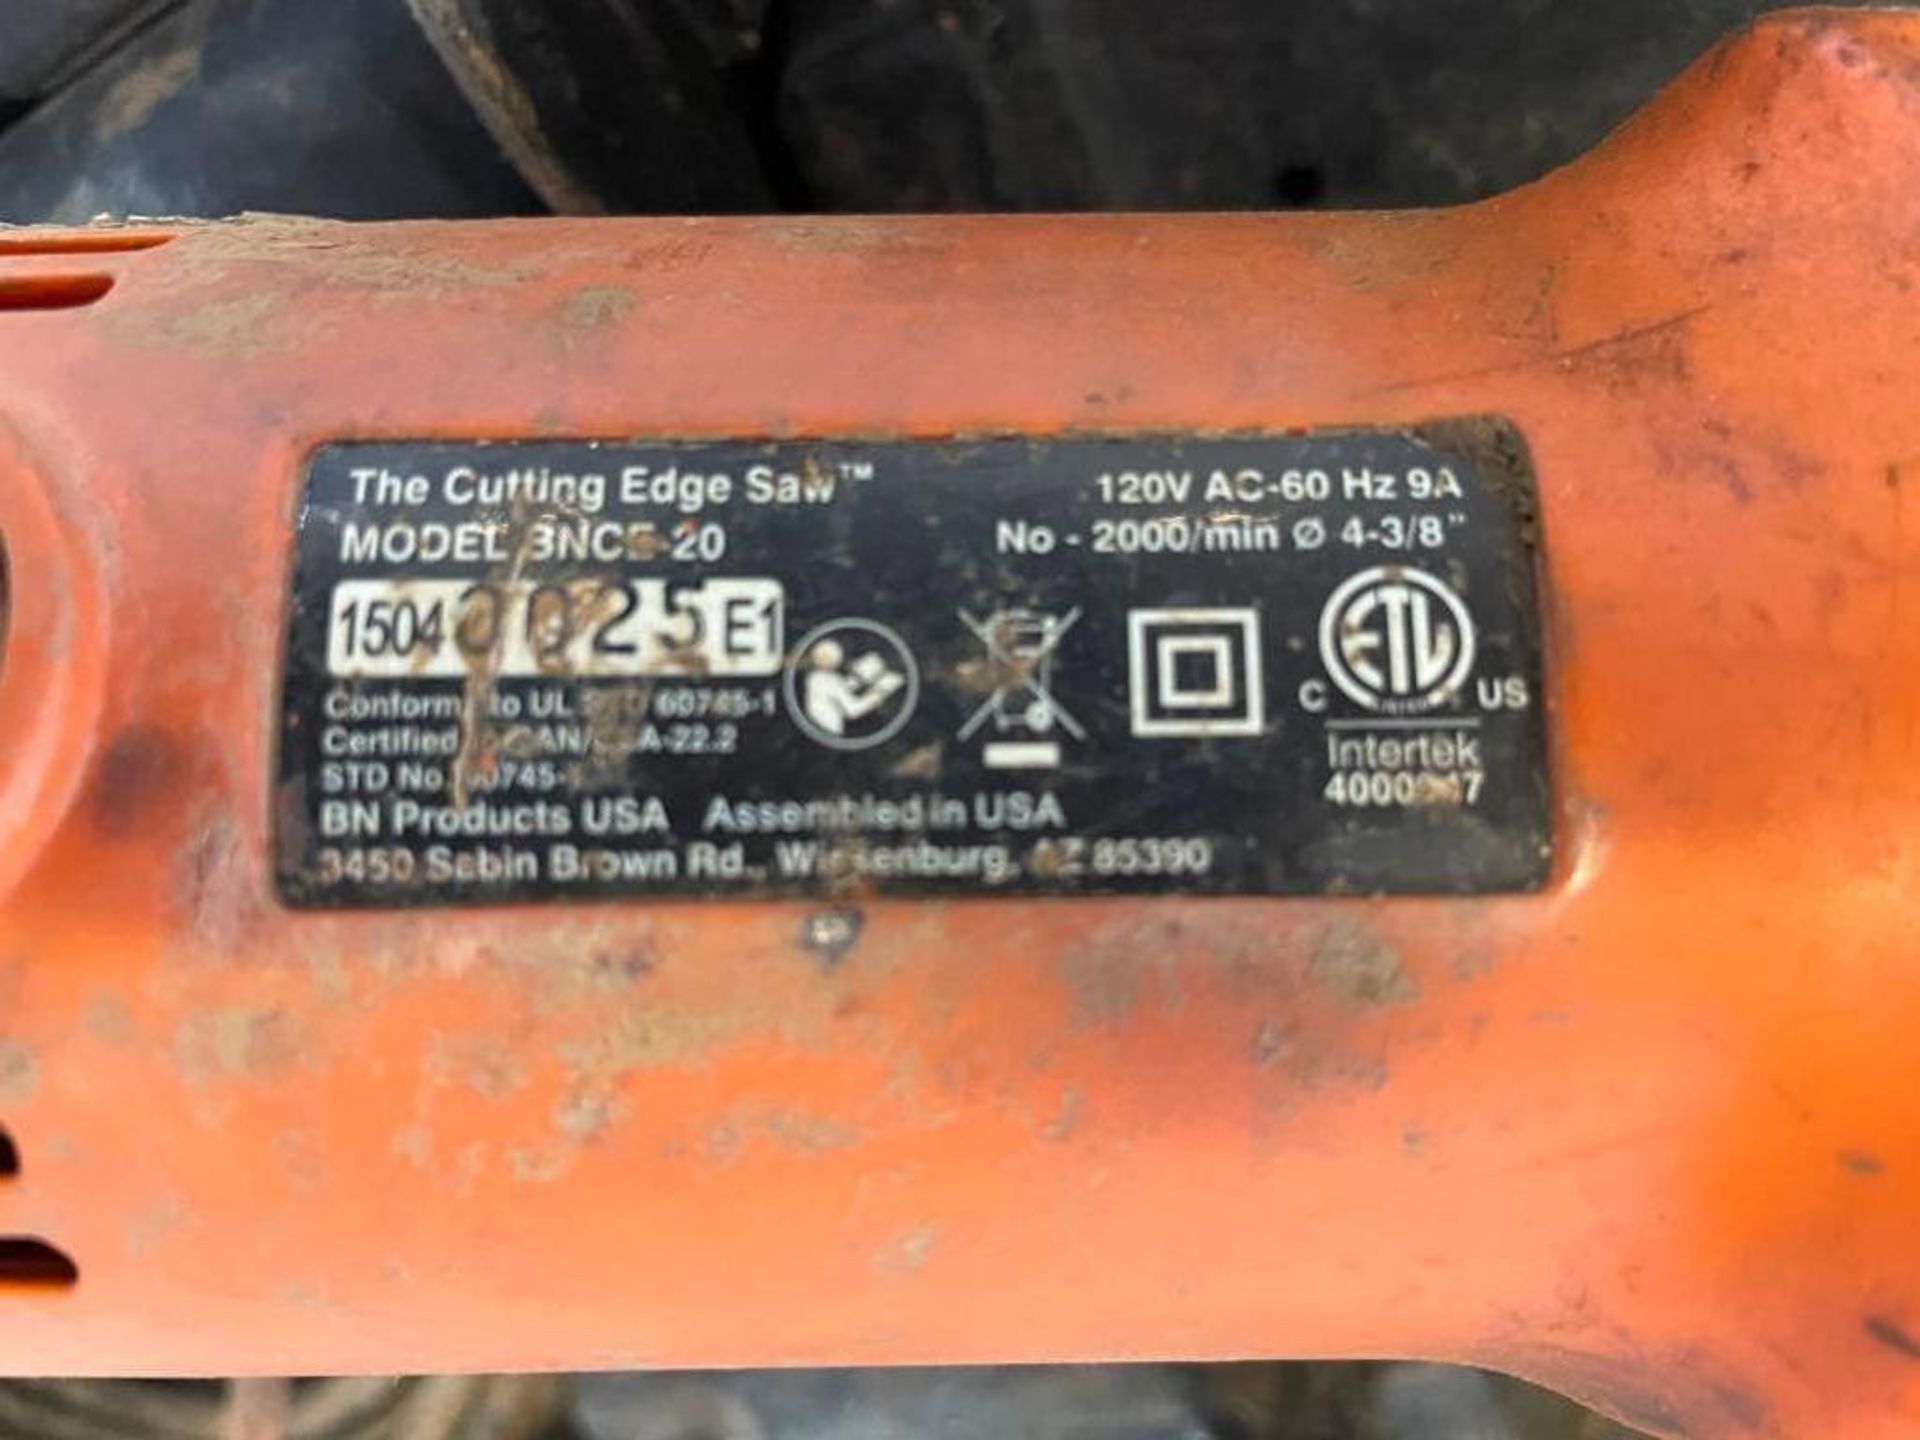 BN BNCE-20 Rotary Rebar Cutting Saw, Serial #1504 0025 E1. 120V in Case. Located in Hazelwood, MO - Image 6 of 6